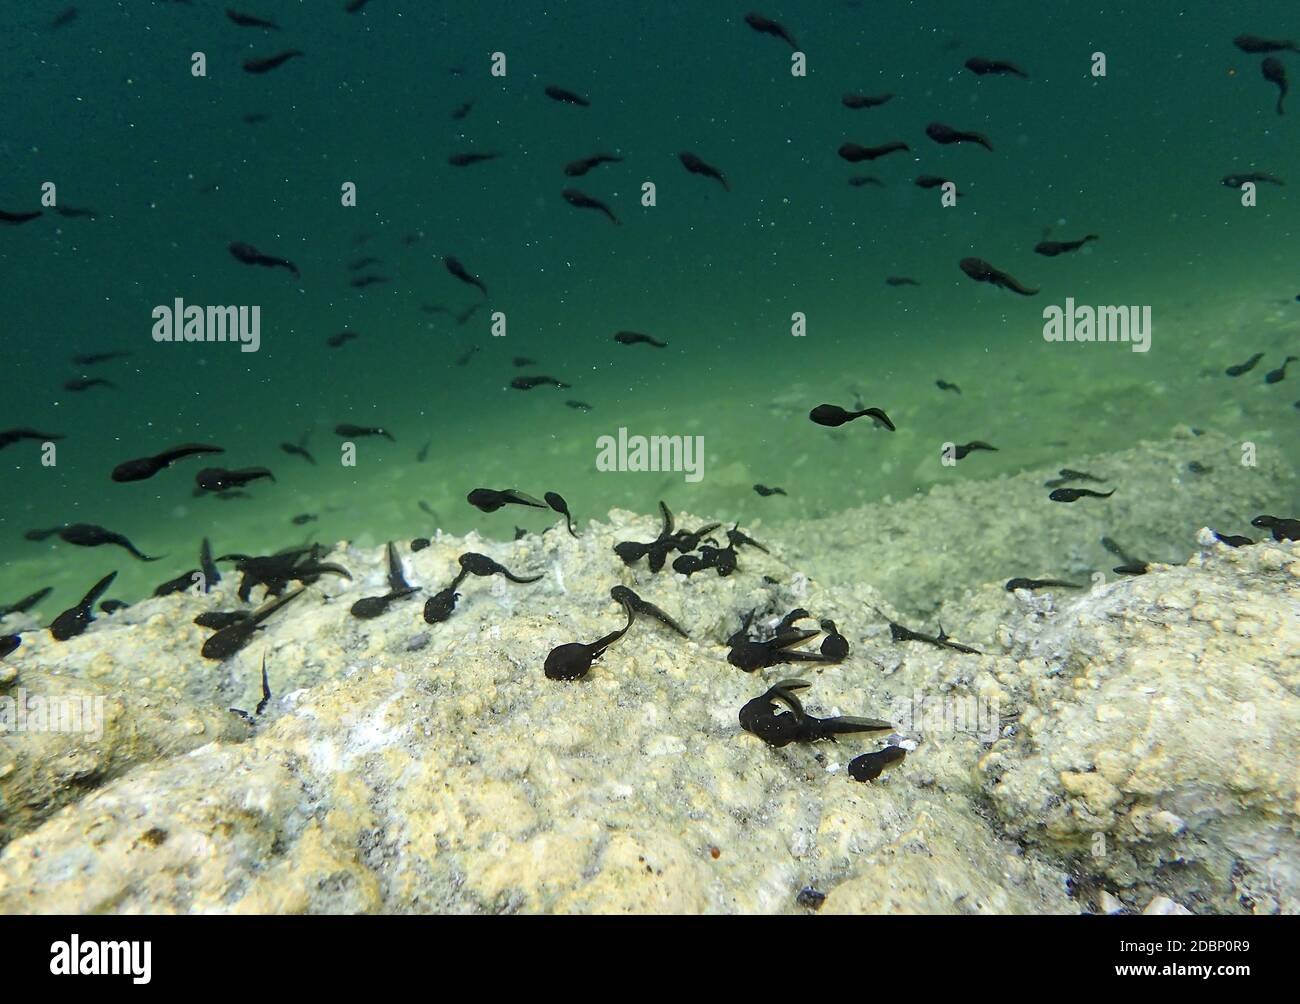 Underwater shot of toads Tadpoles in a lake Stock Photo